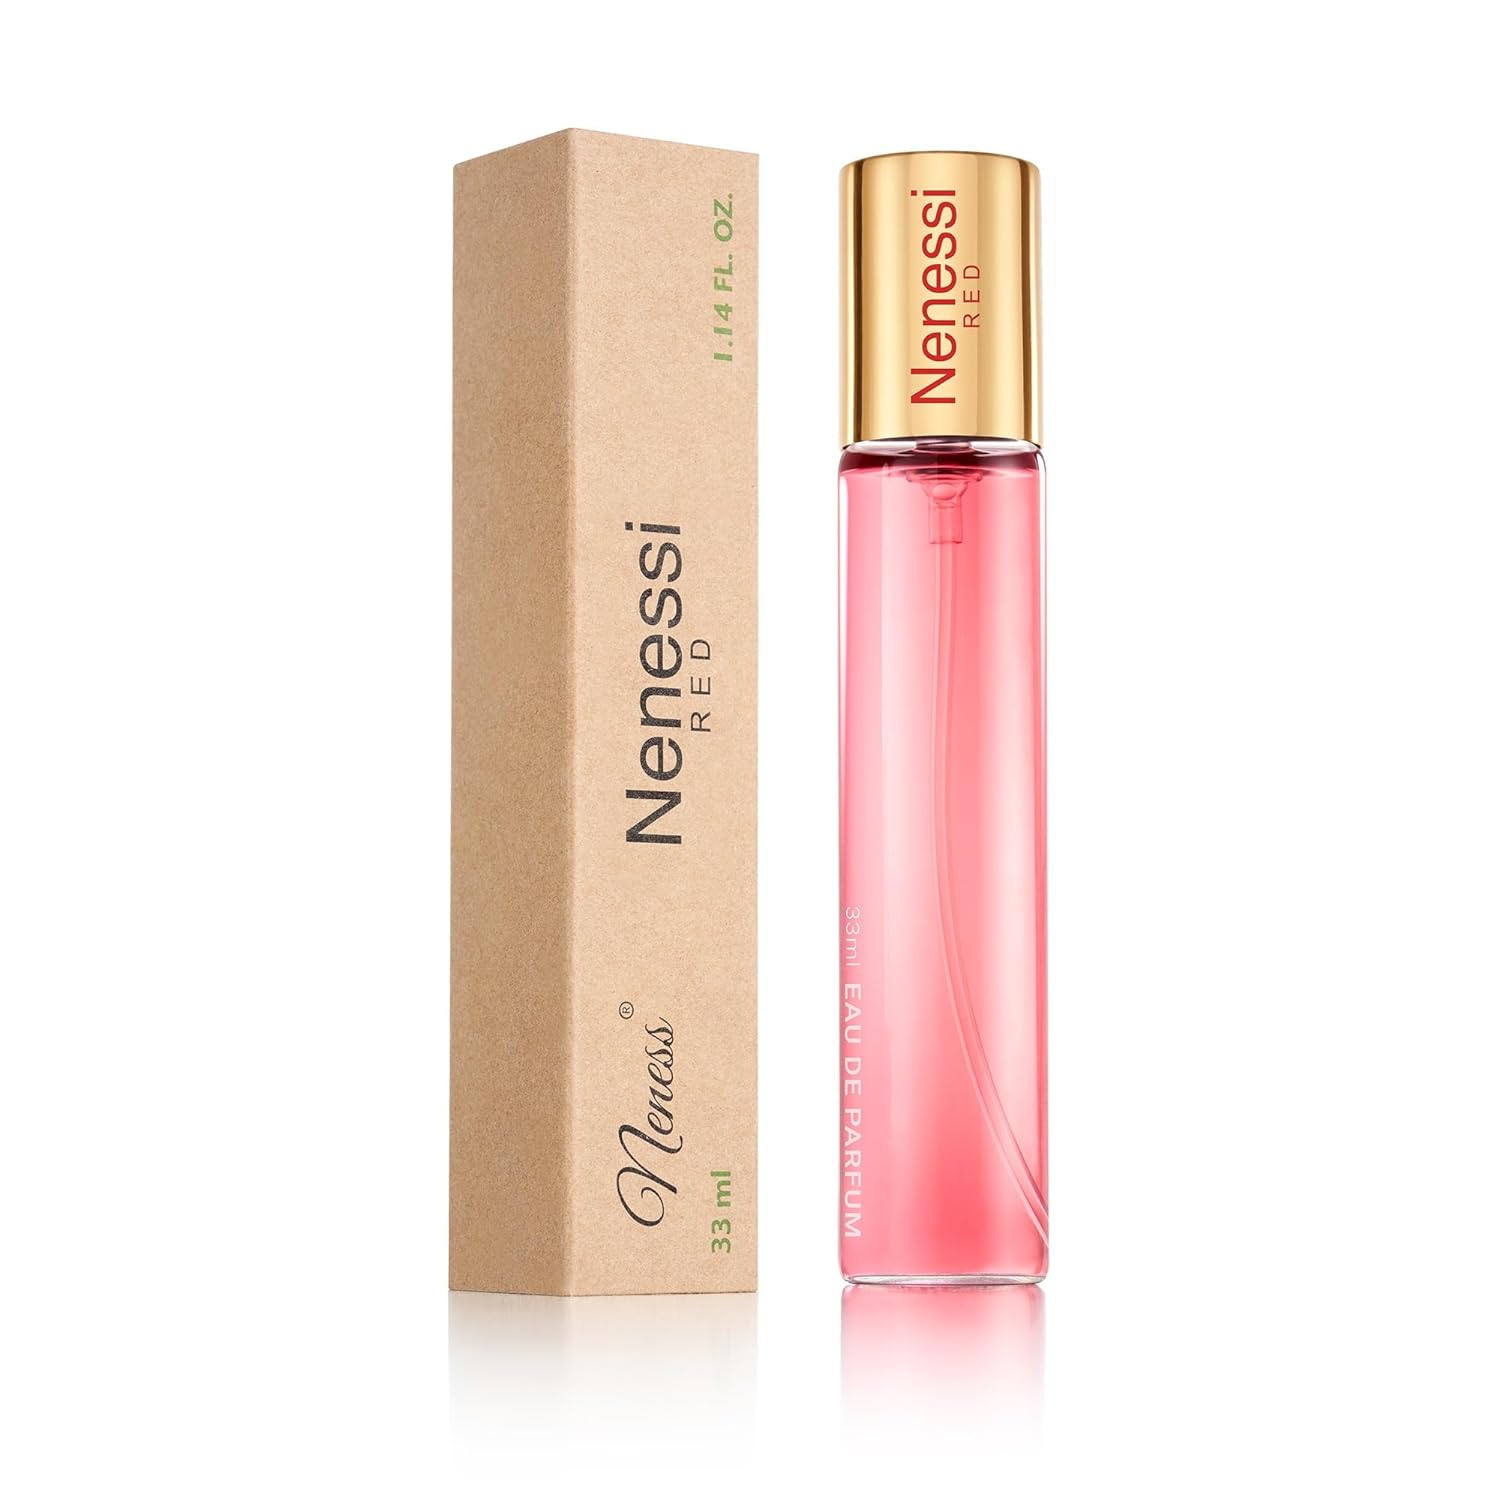 NenesSi Red Women\'s Perfume, Eau de Parfum, Bold and Feminine Fragrance for Any Occasion, 33 ml